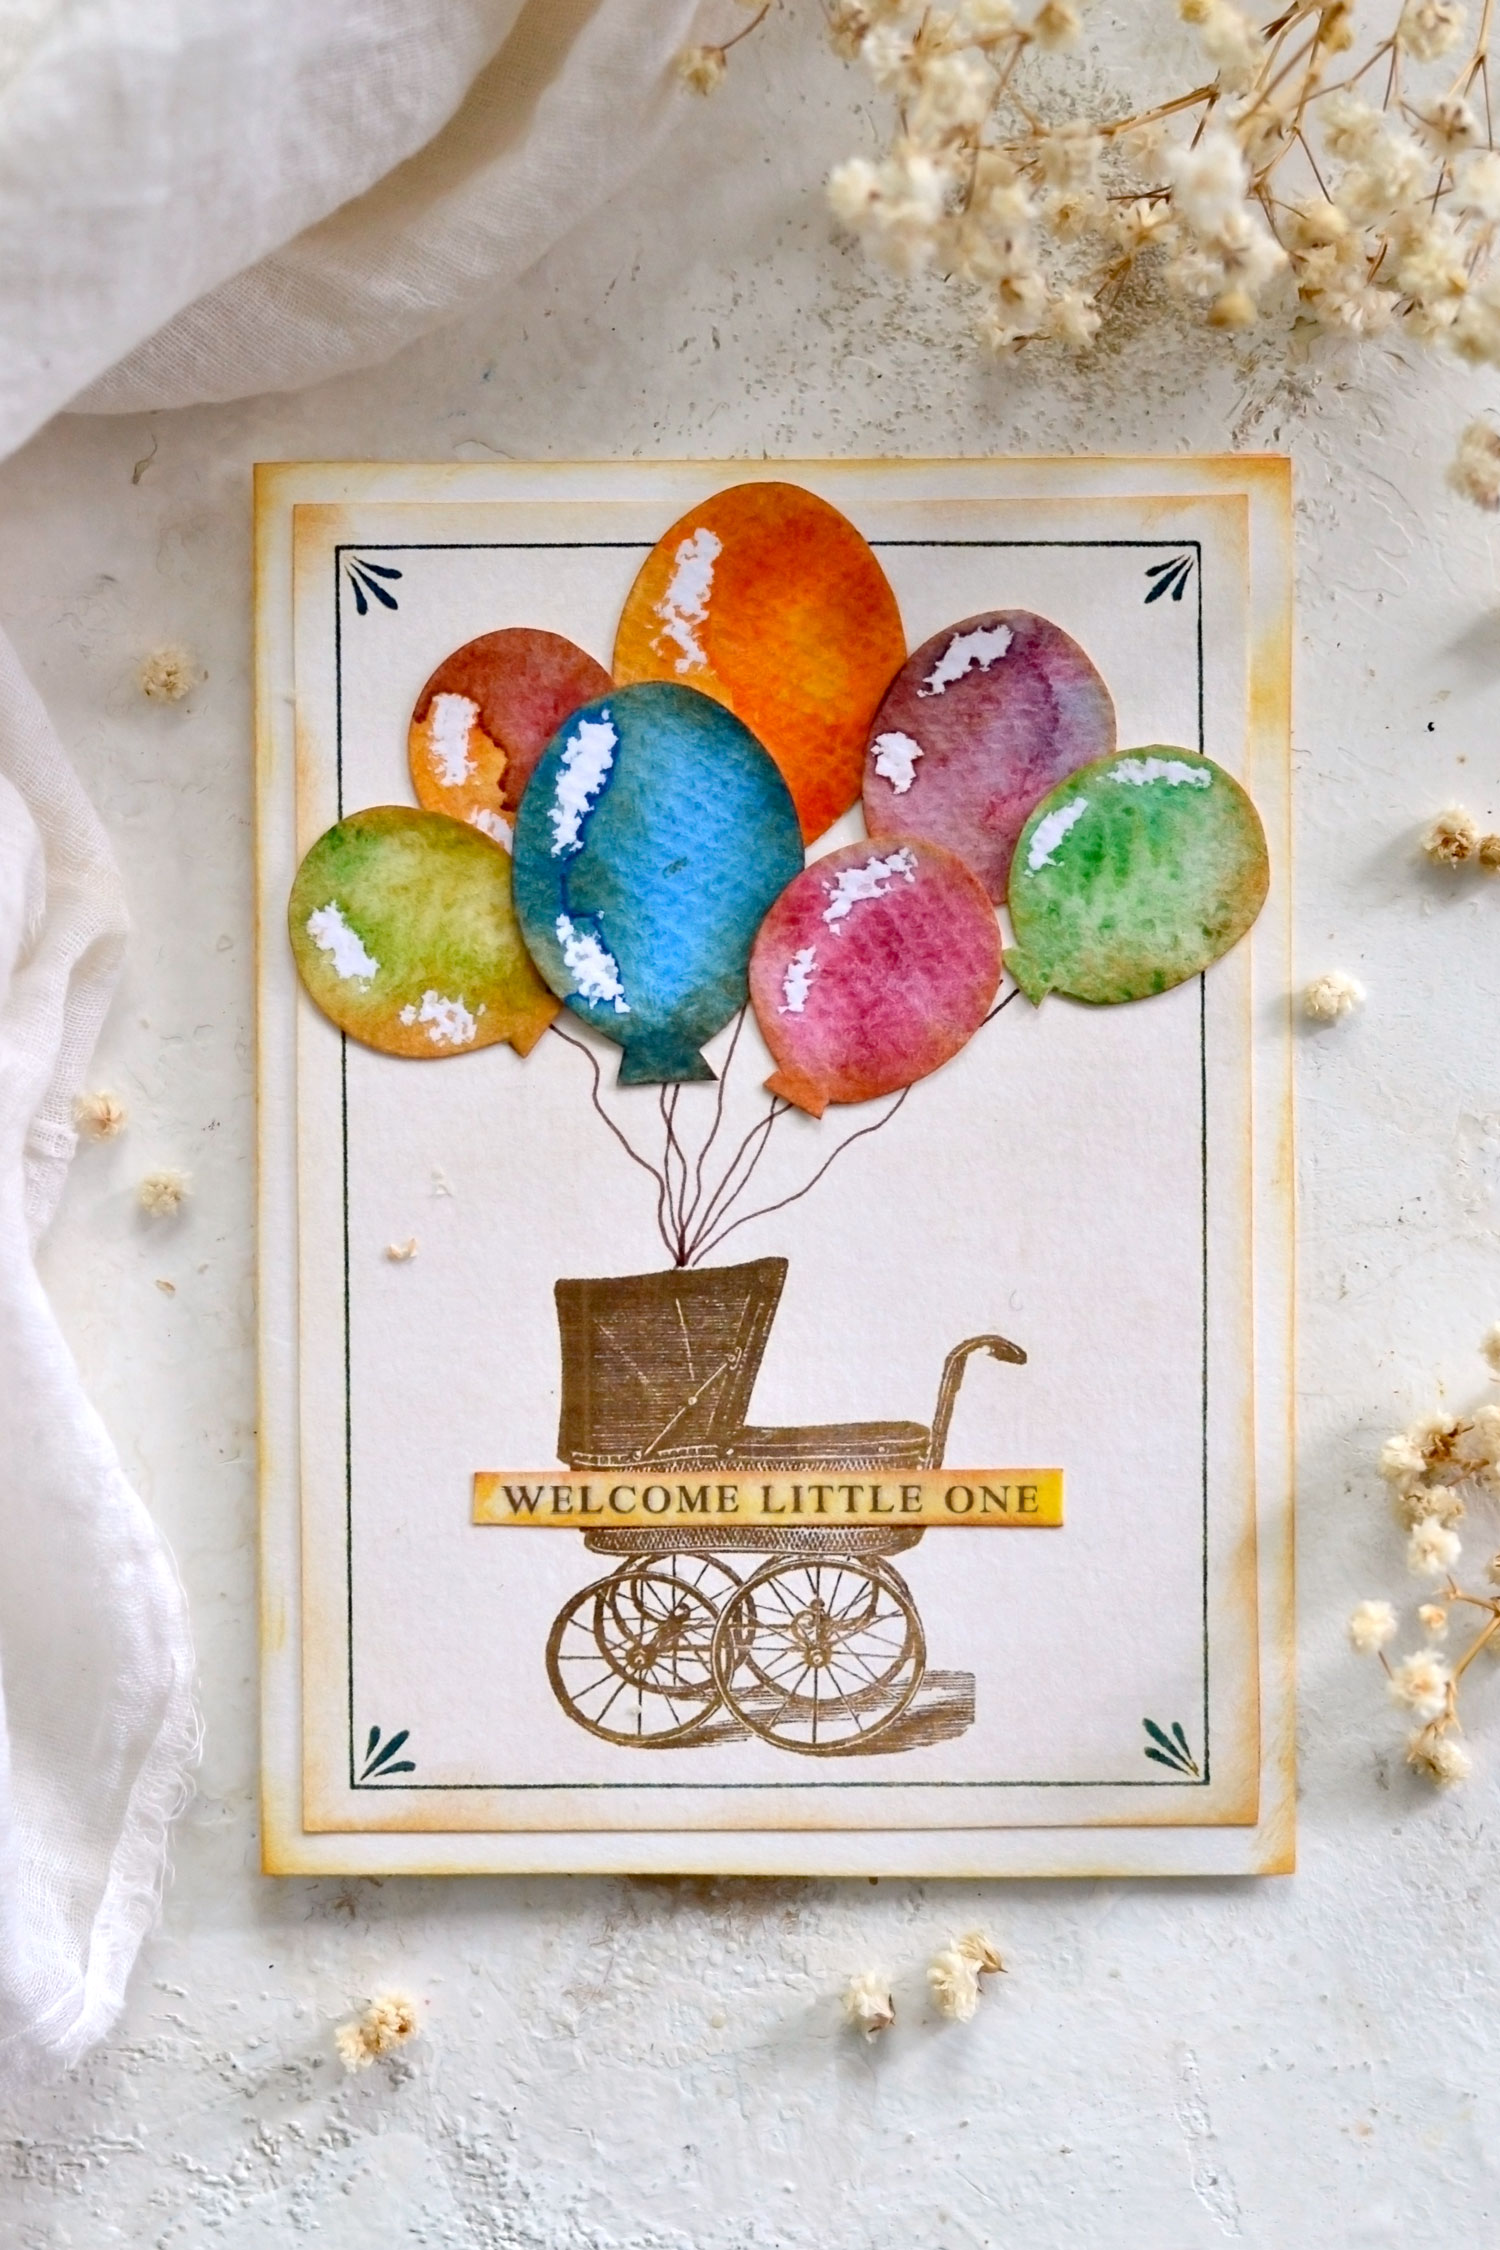 New Baby Card ideas with watercolor balloons